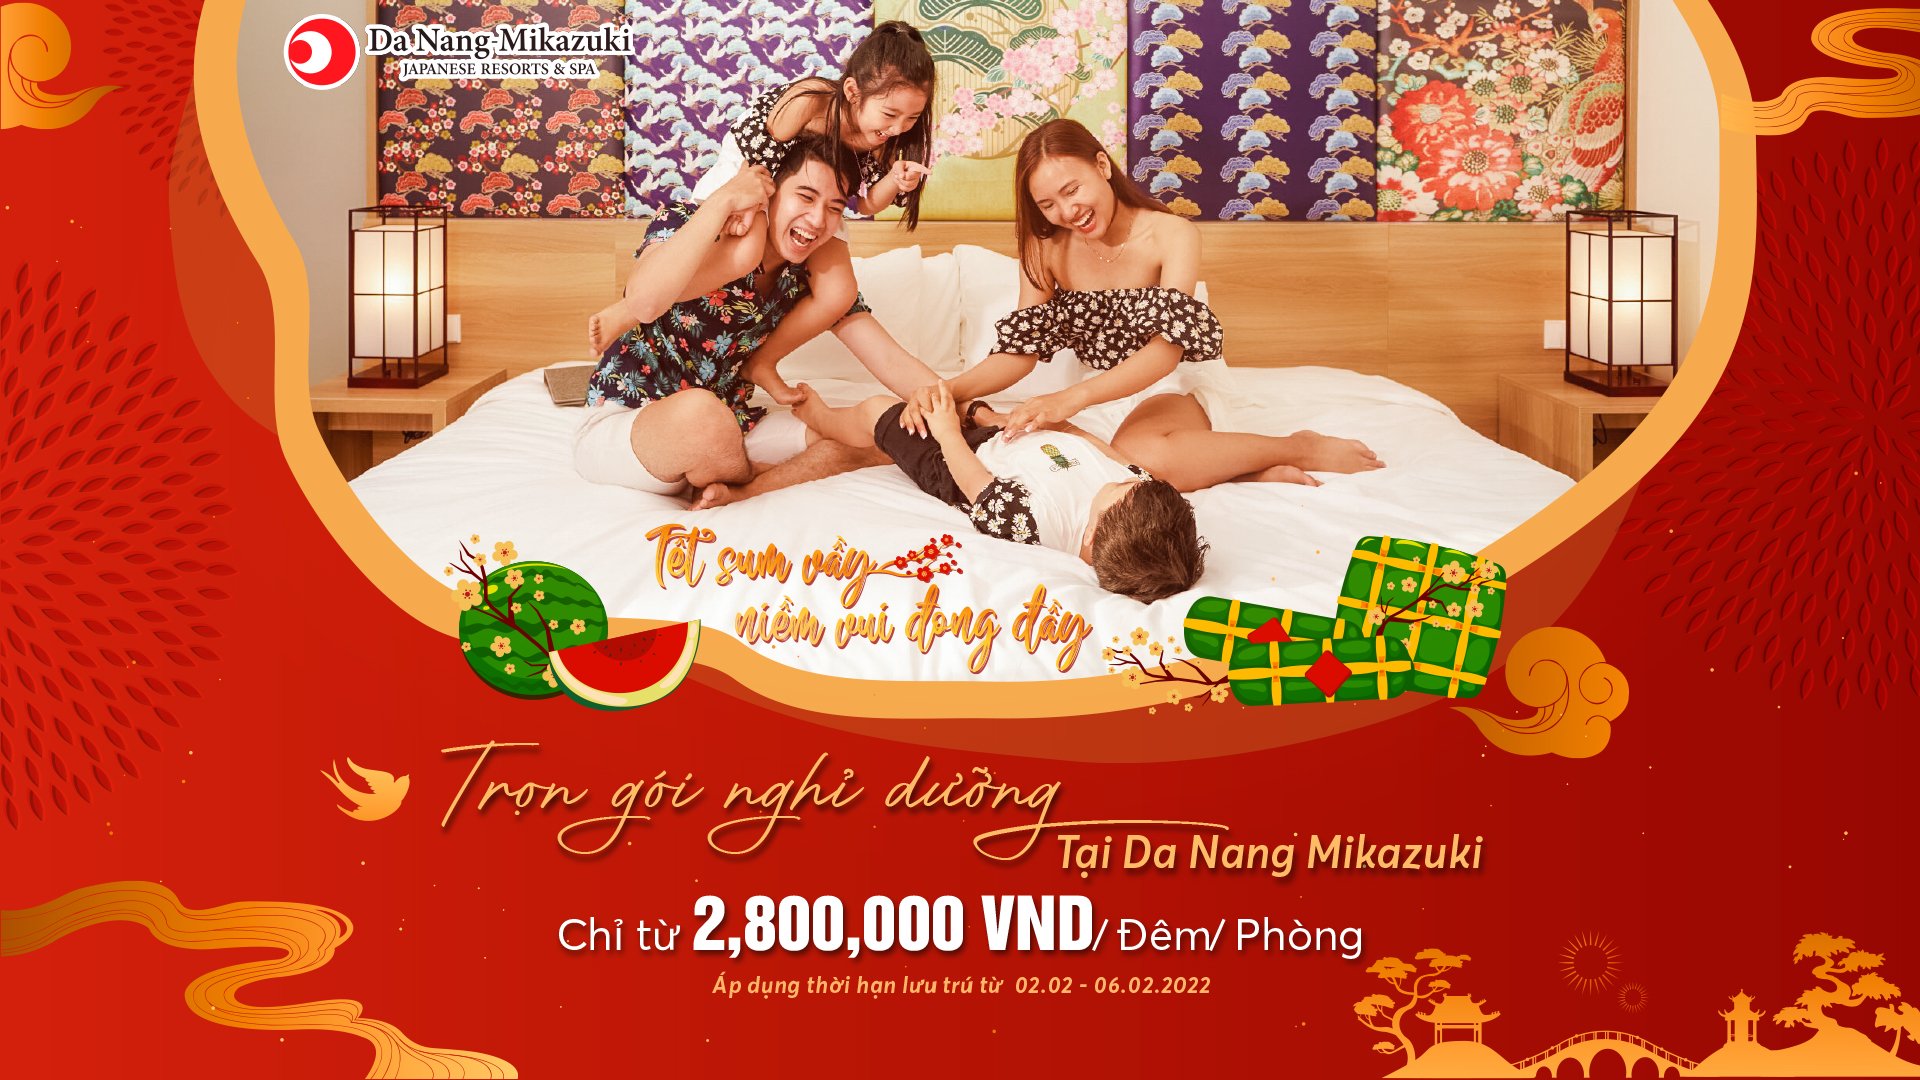 HAPPY LUNAR NEW YEAR WITH SPECIAL OFFER ONLY FROM 2,800,000 VND FOR COMBO!